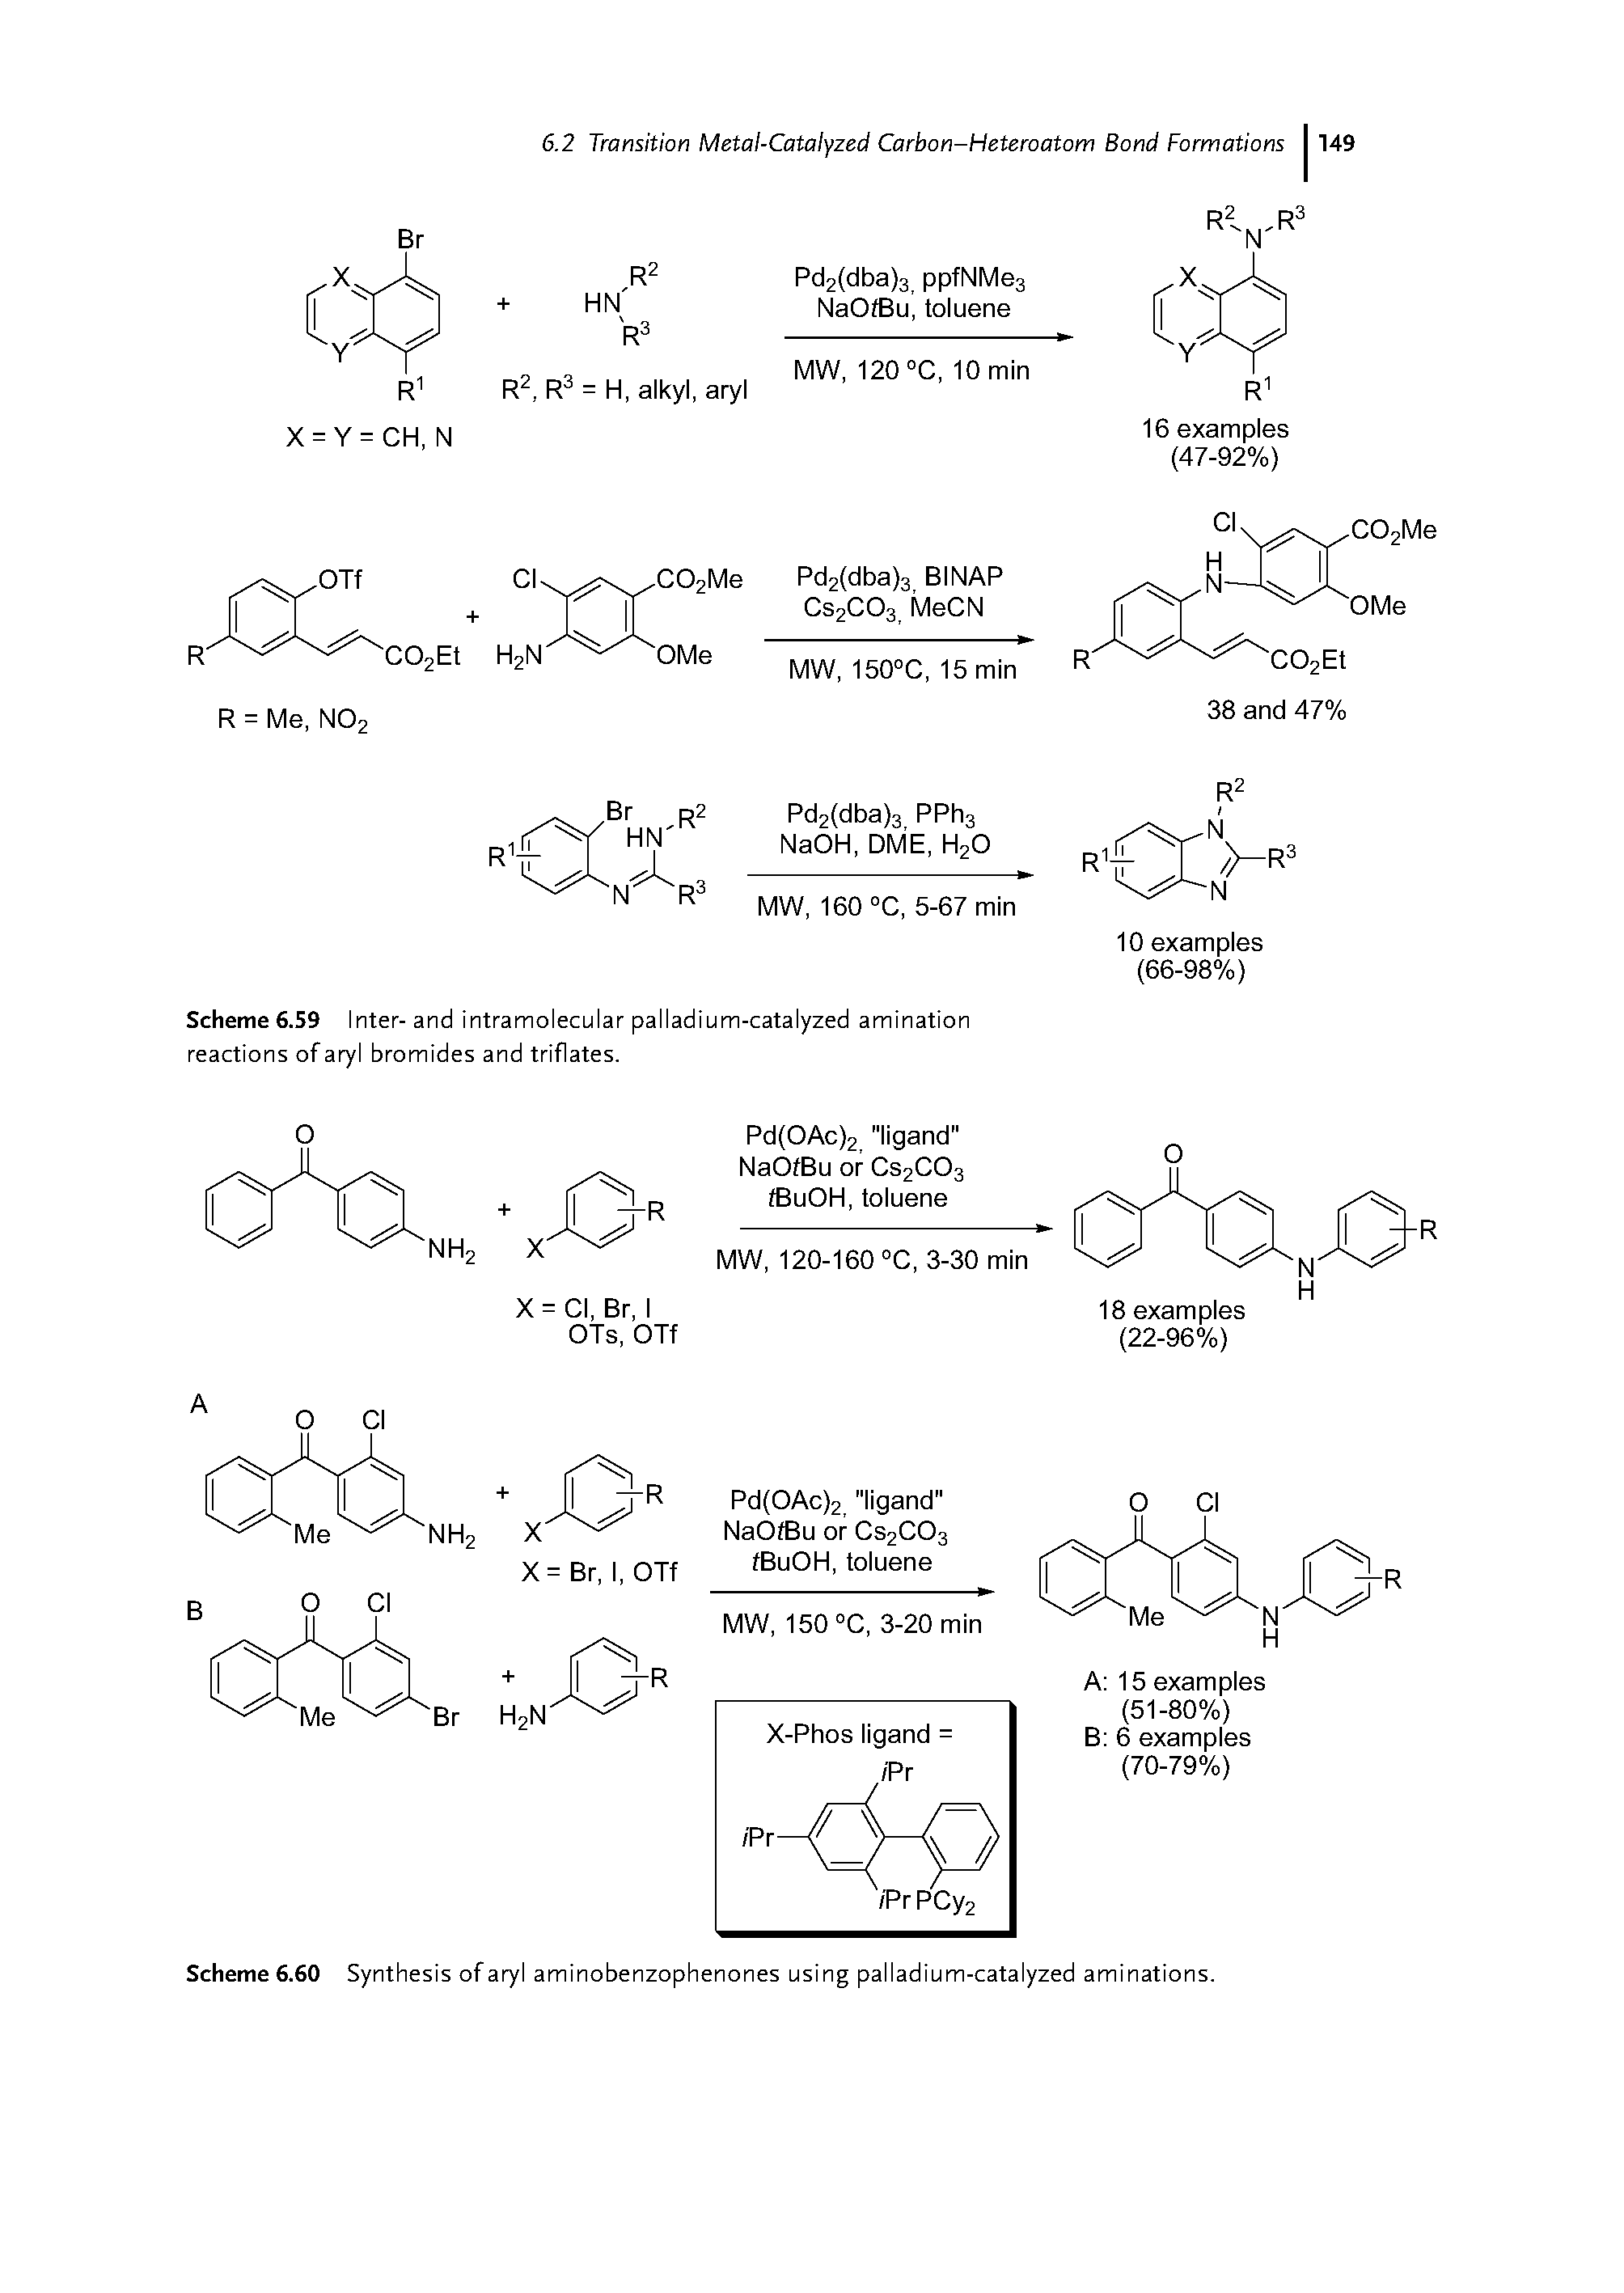 Scheme 6.59 Inter- and intramolecular palladium-catalyzed amination reactions of aryl bromides and triflates.